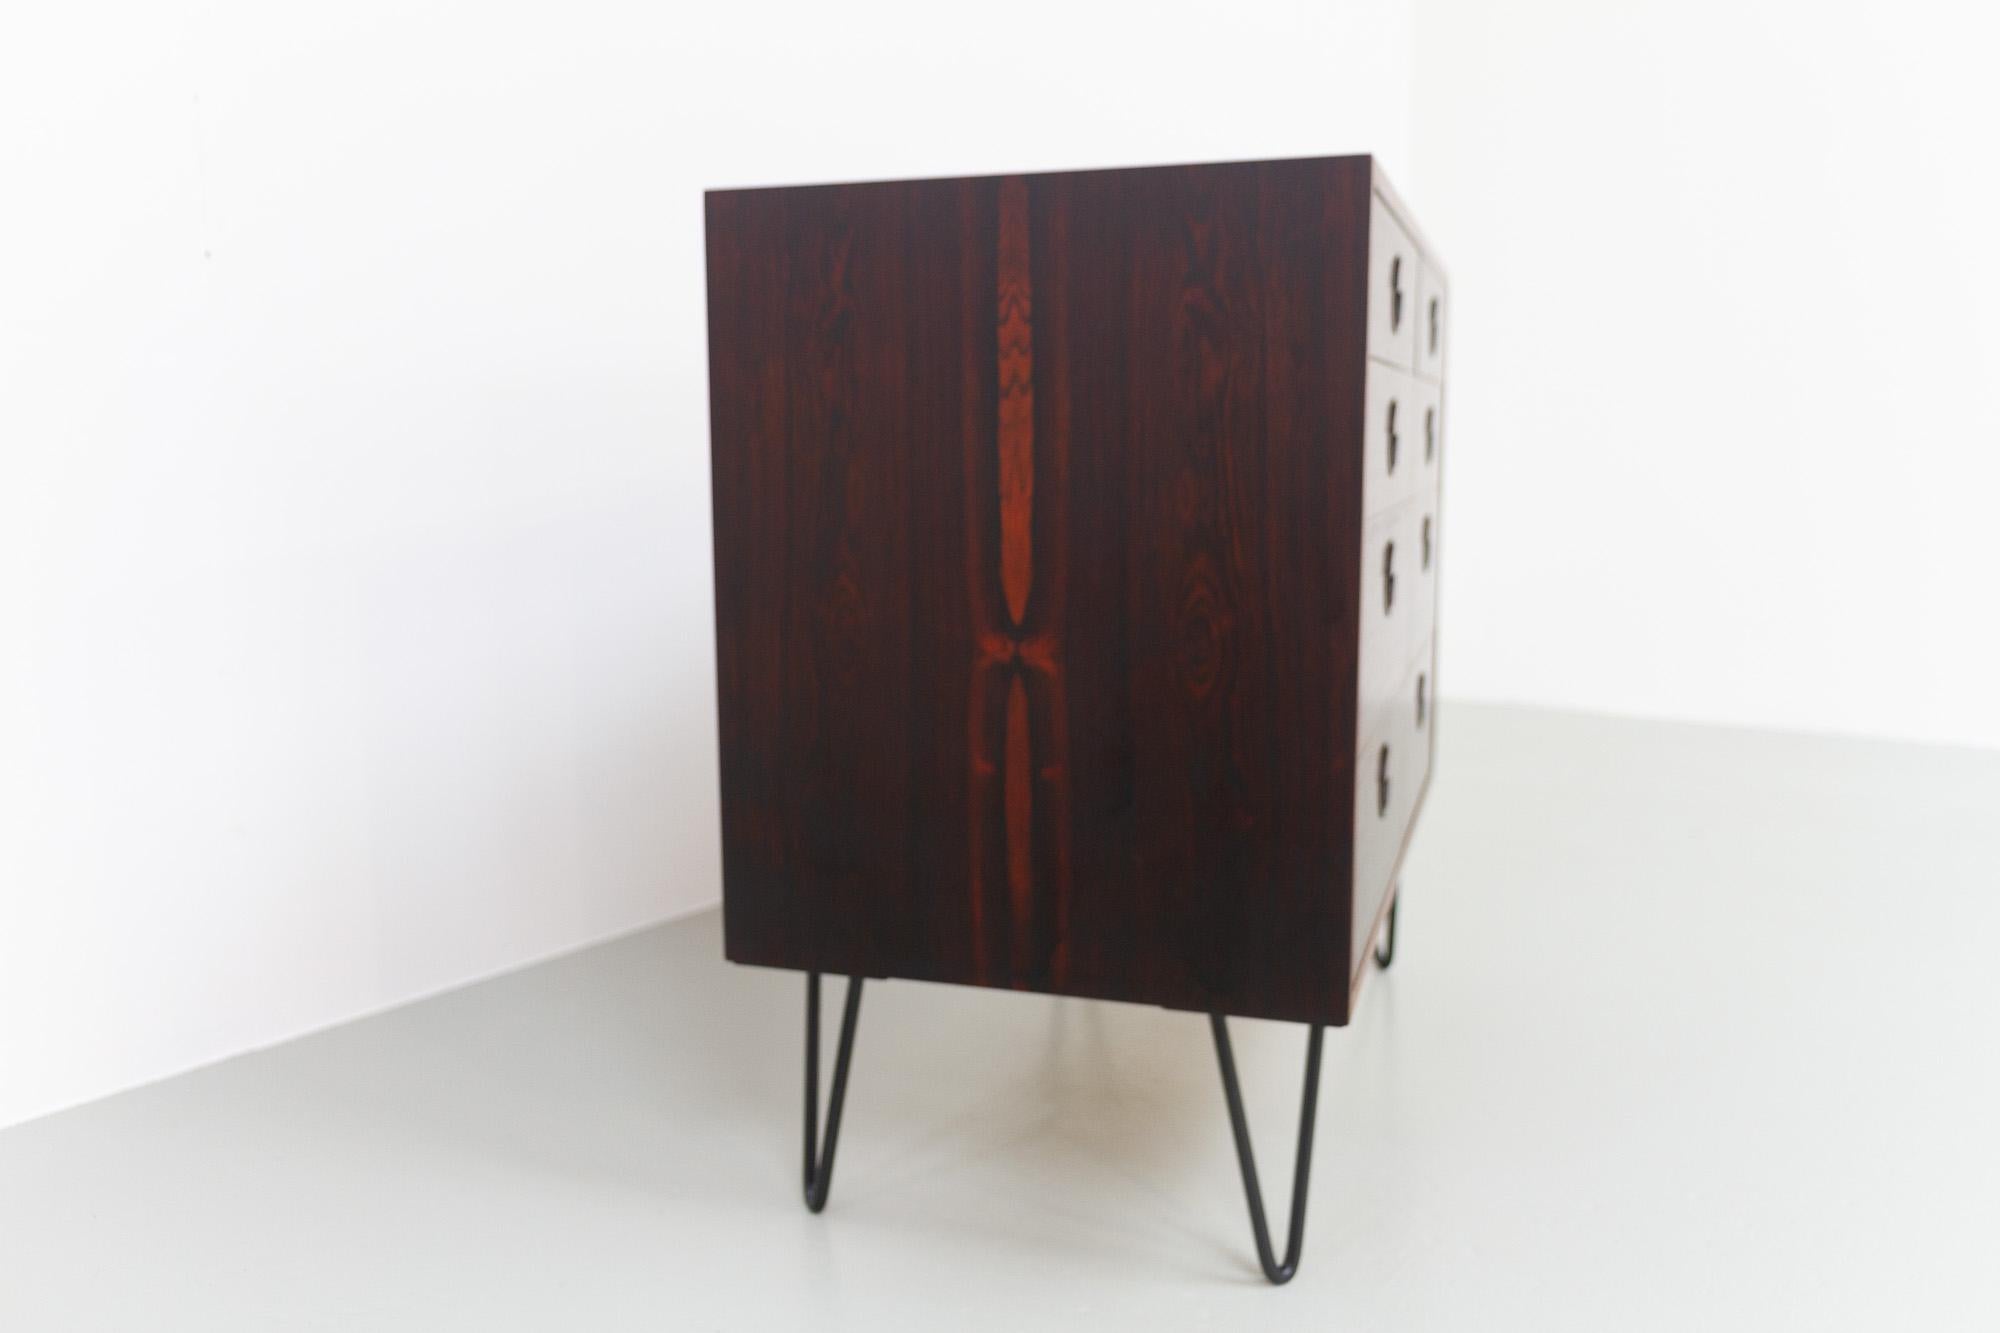 Vintage Danish Rosewood Chest of Drawers by Hg Furniture, 1960s For Sale 3